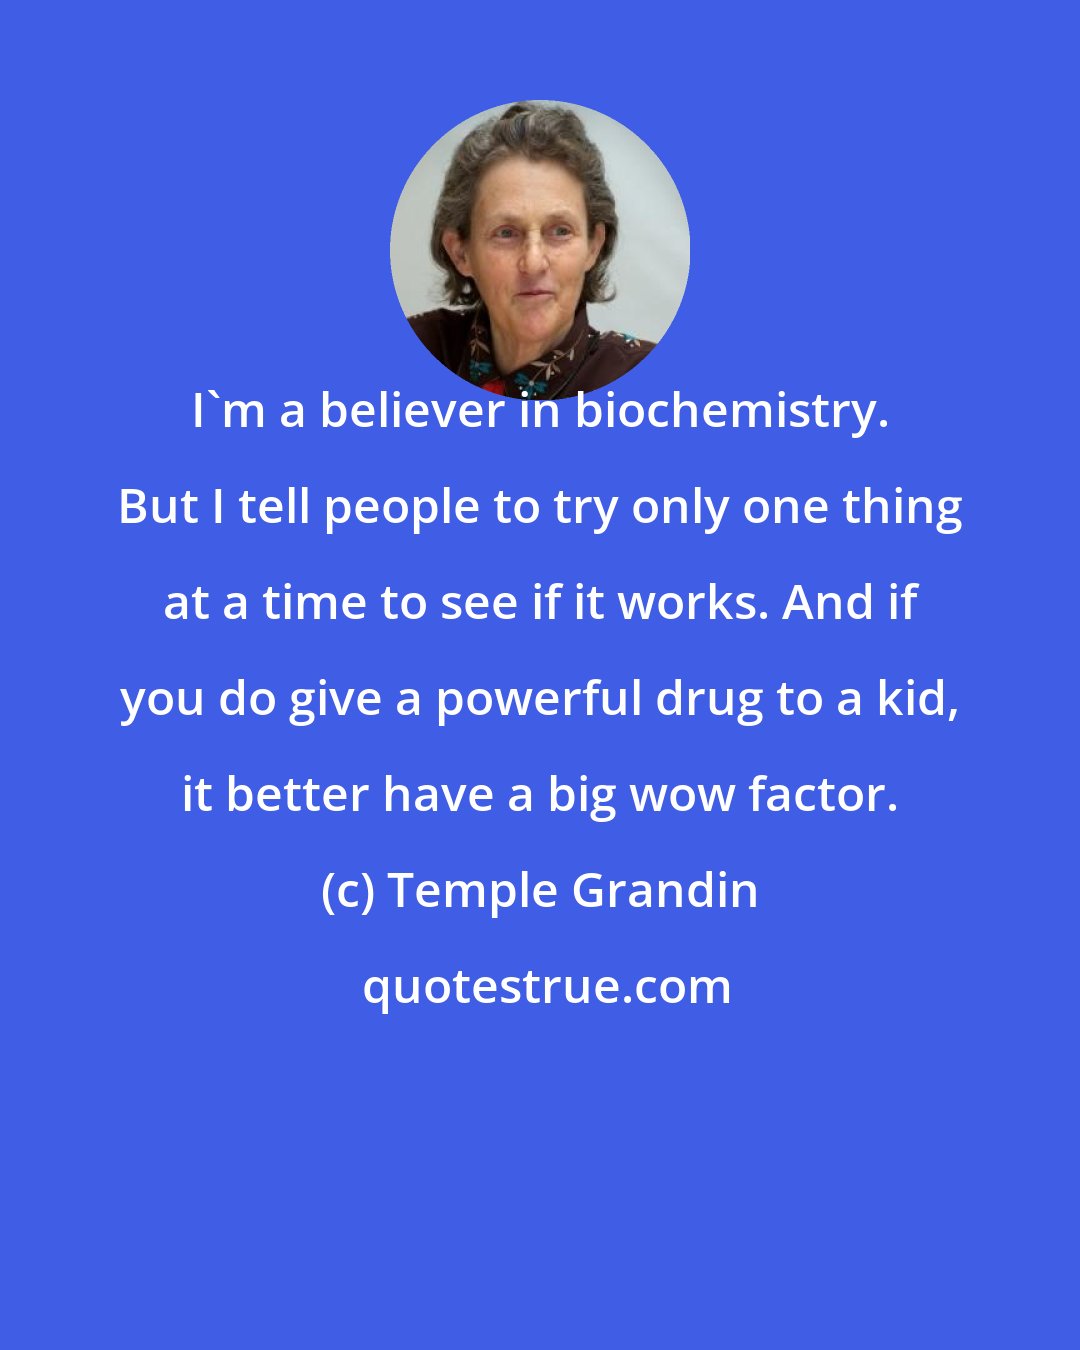 Temple Grandin: I'm a believer in biochemistry. But I tell people to try only one thing at a time to see if it works. And if you do give a powerful drug to a kid, it better have a big wow factor.